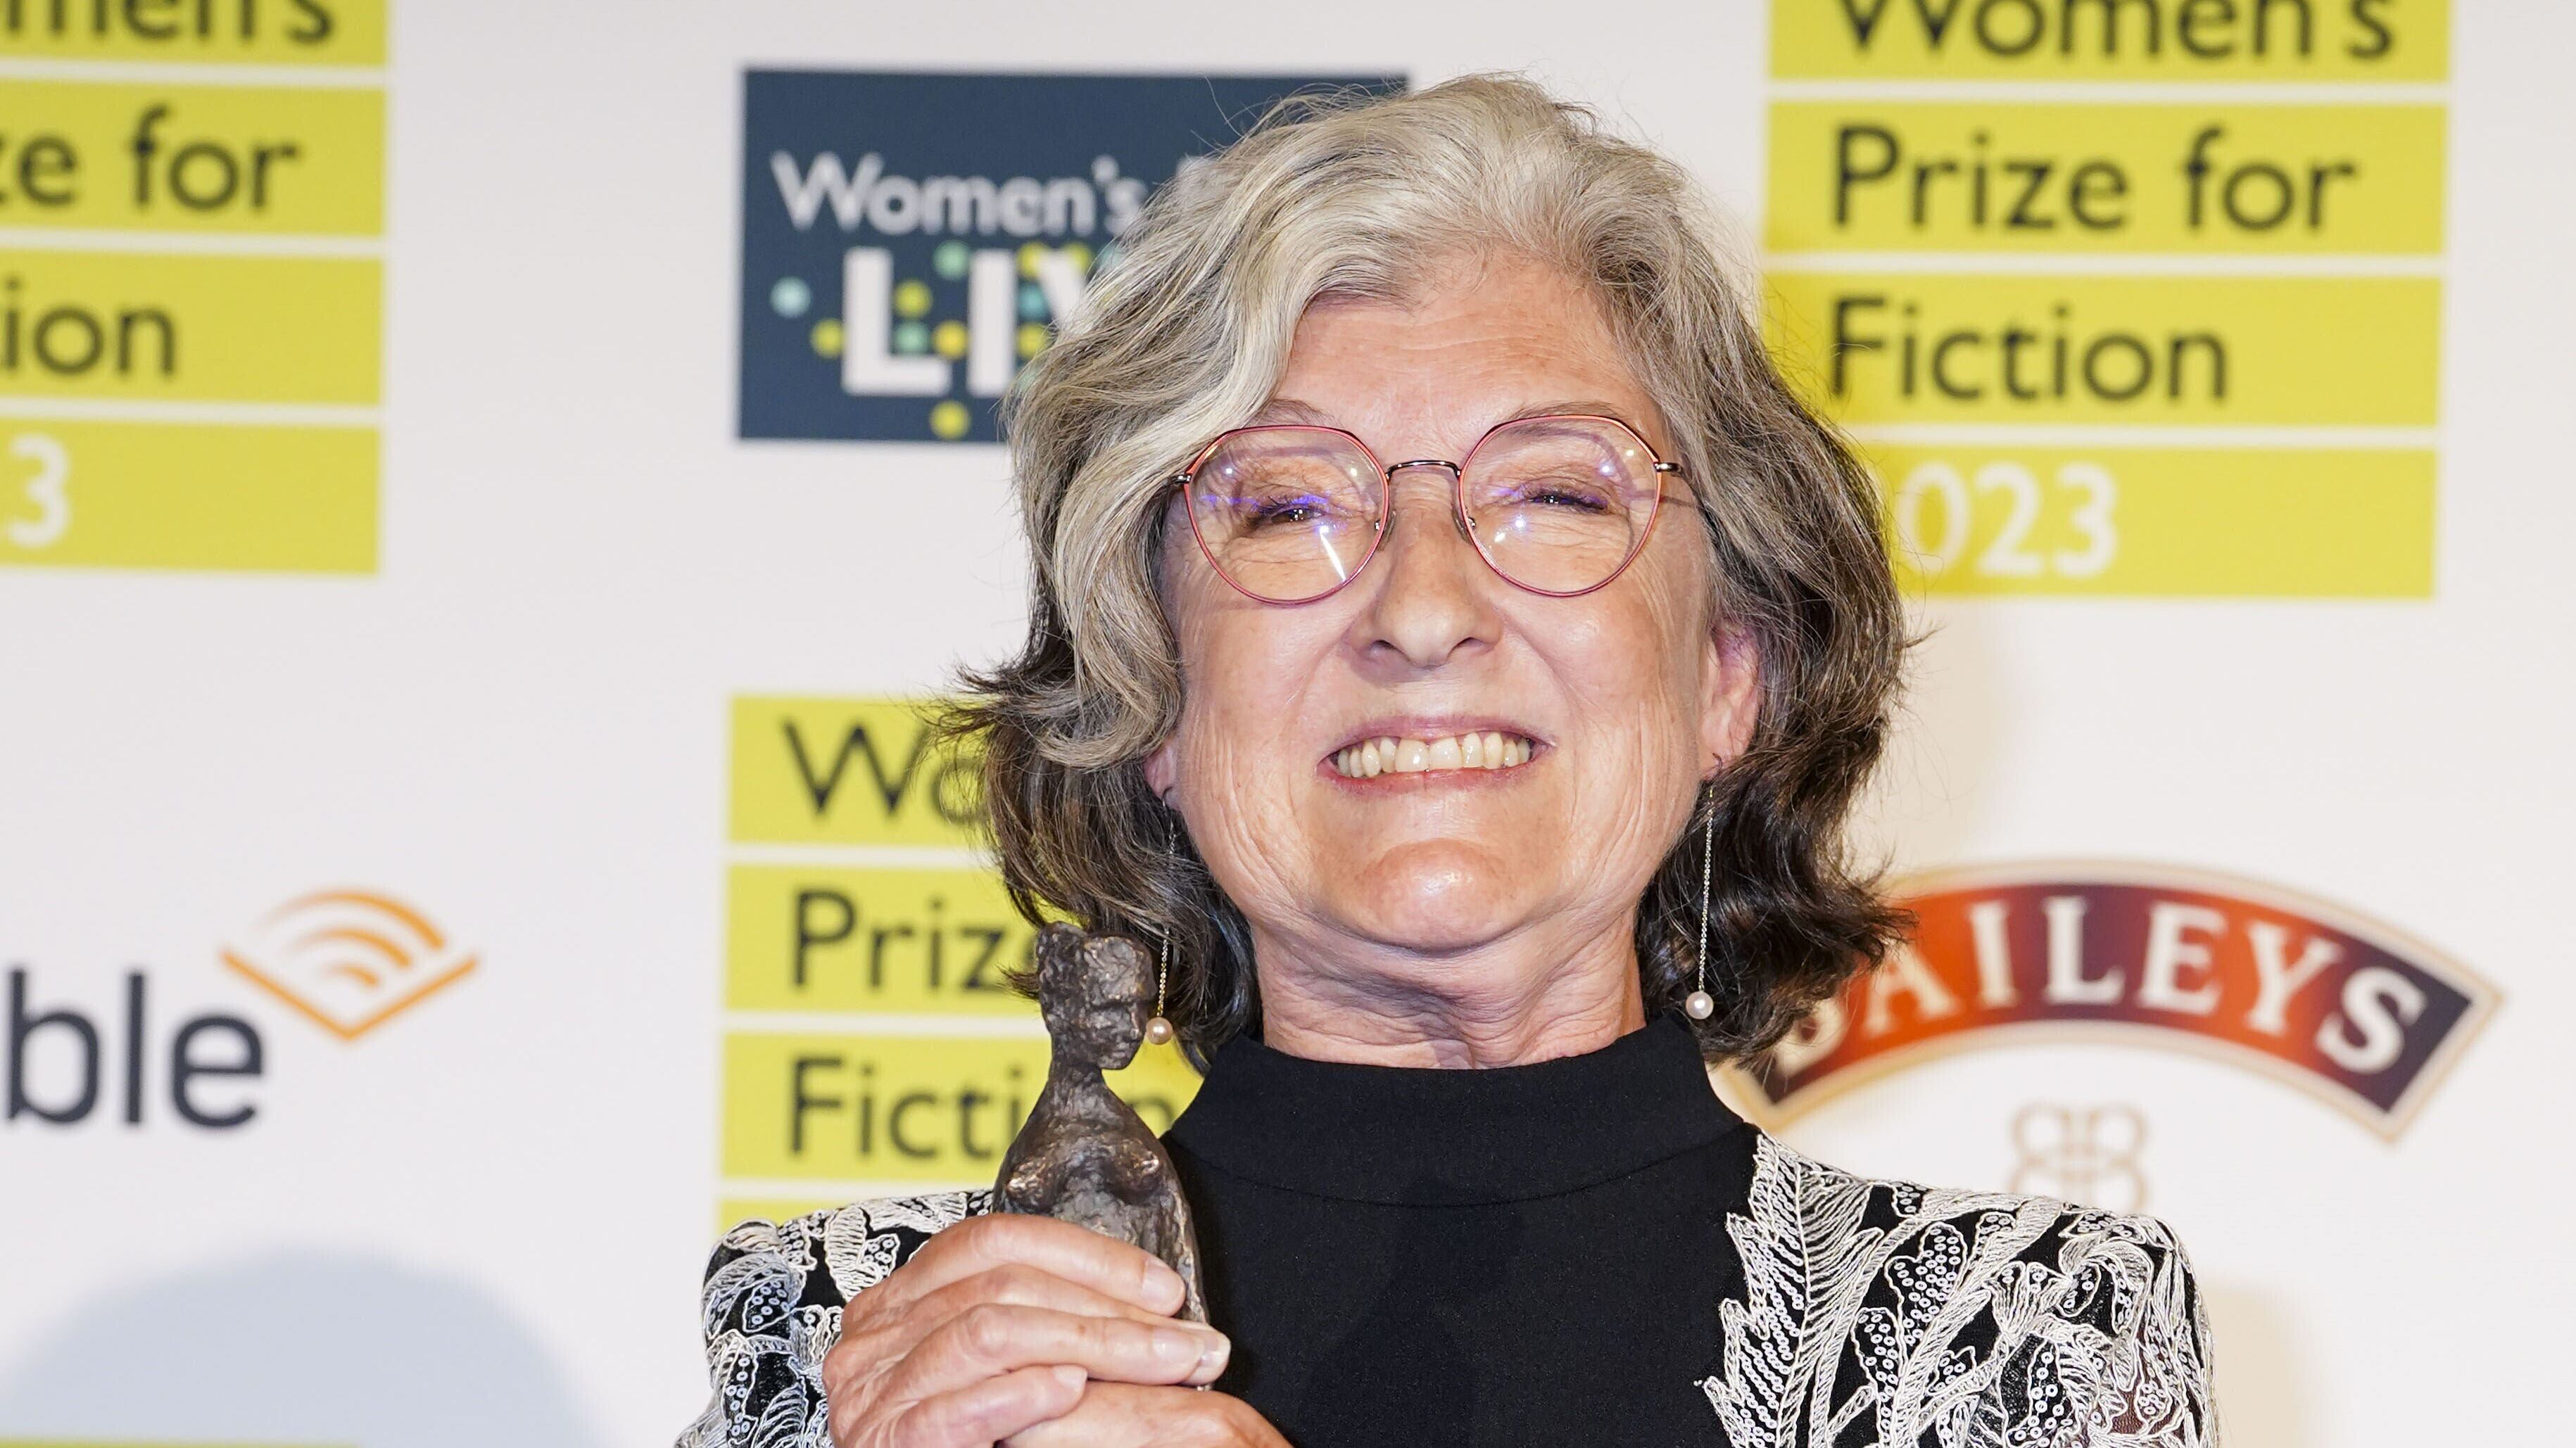 Barbara Kingsolver said she is happy that her readers will follow her ‘wherever I go in a literary way’ following her historic win.